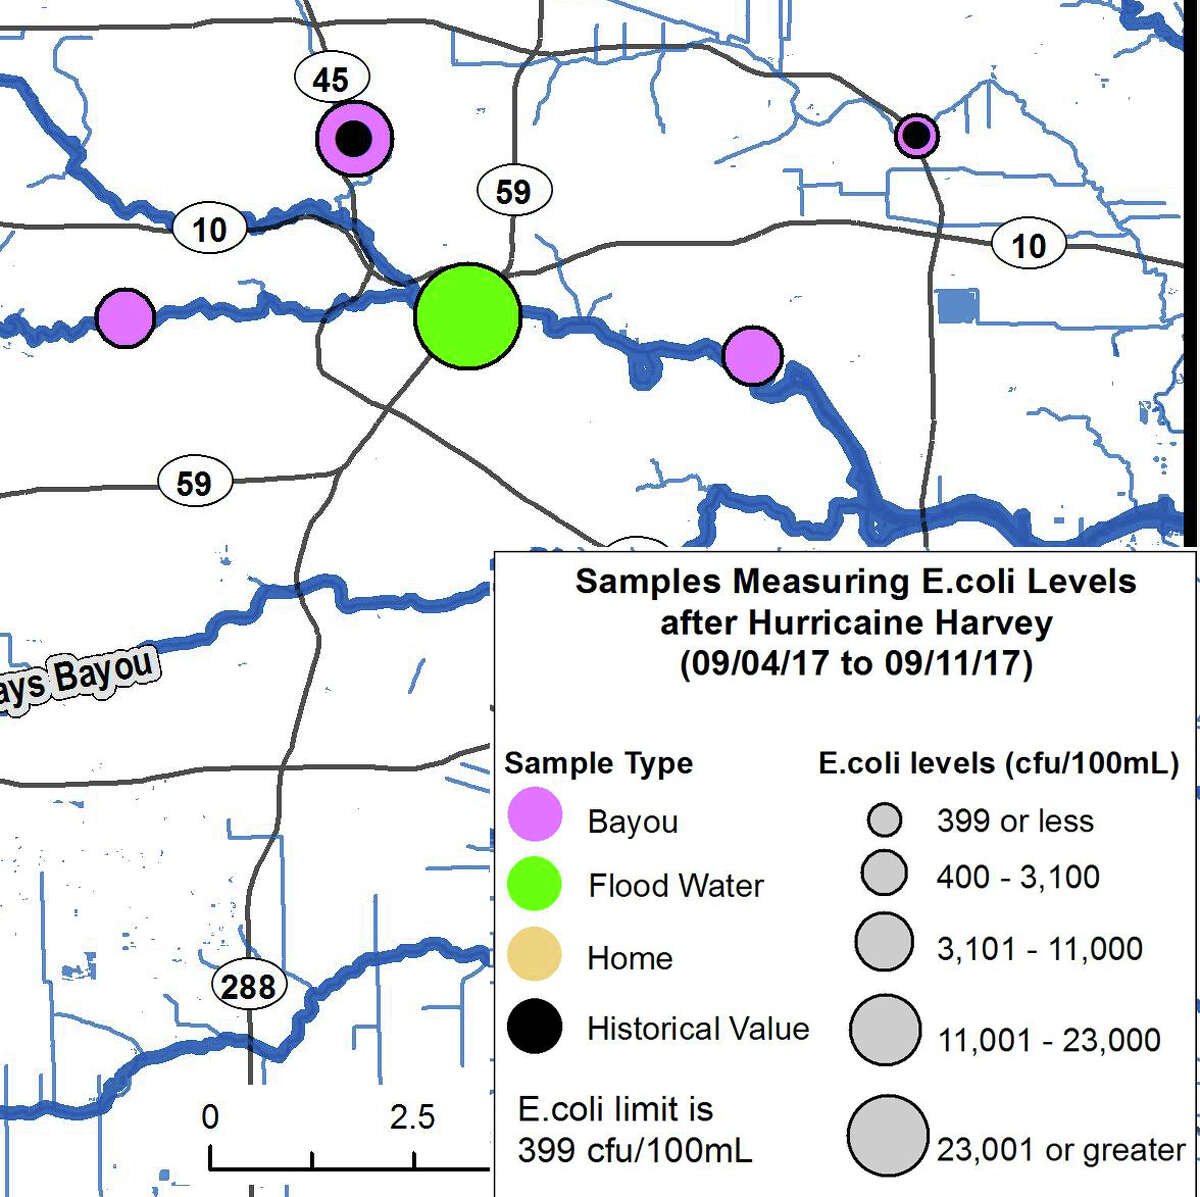 new-maps-show-how-contaminated-houston-surface-water-was-following